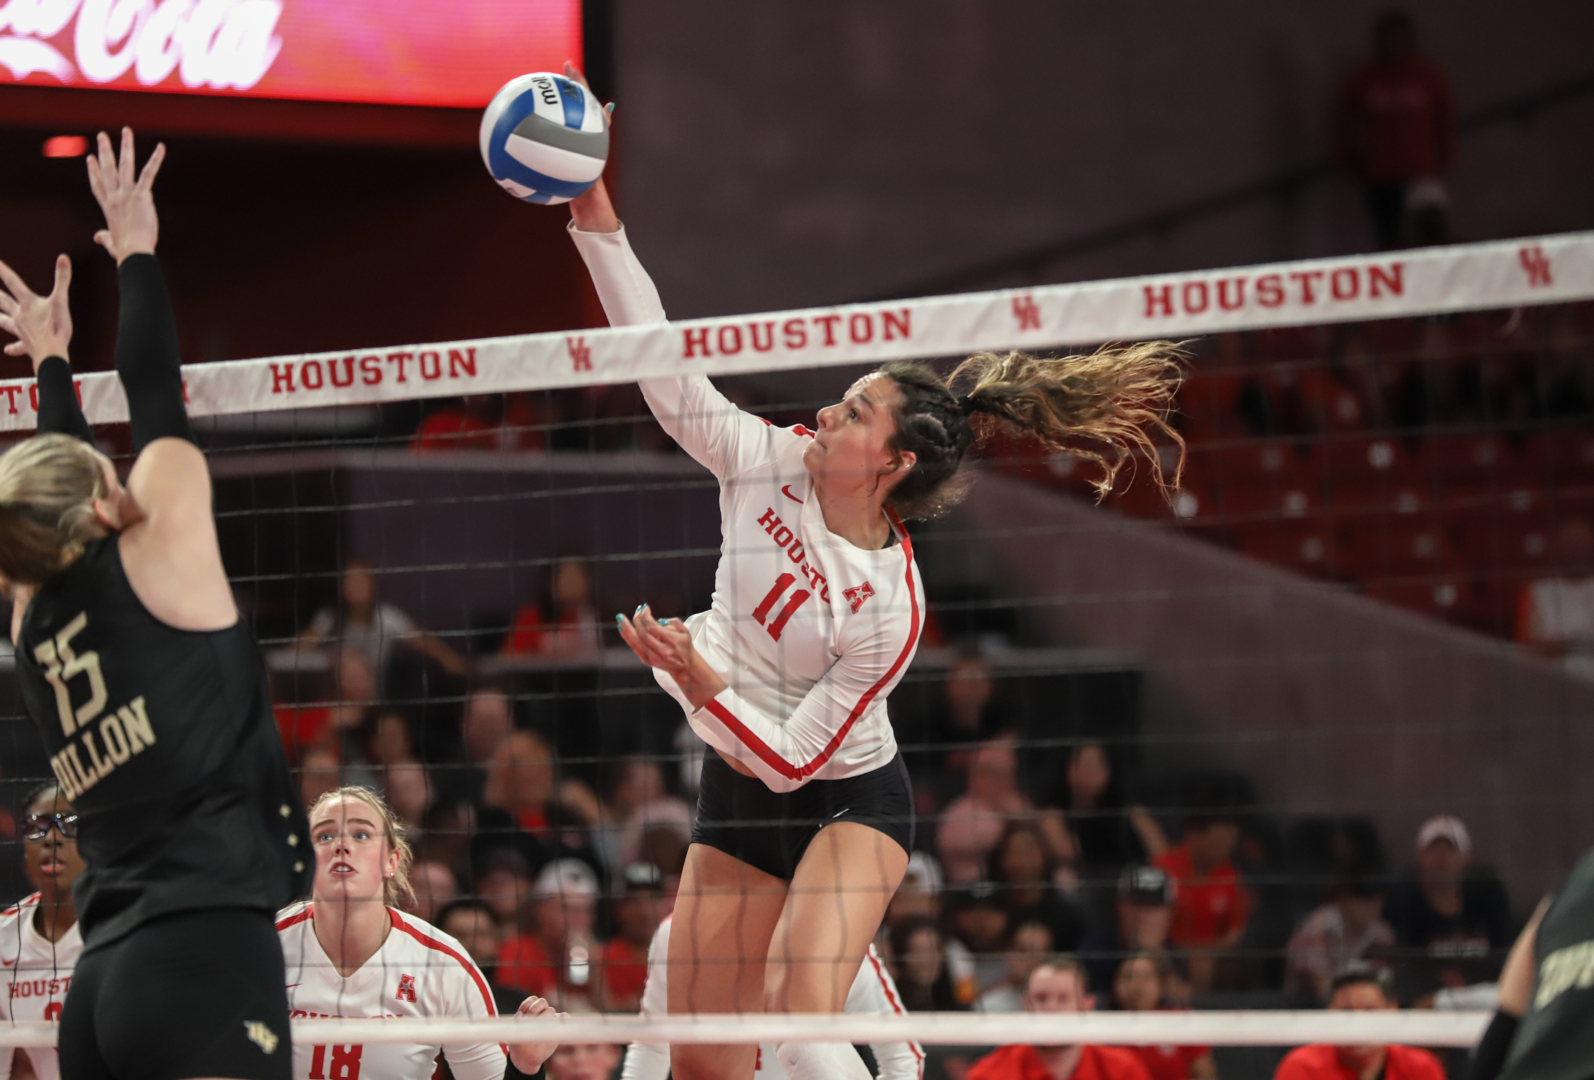 Senior middle blocker Rachel Tullos had a perfect hitting percentage in UH volleyball's win over SMU on Friday. | Sean Thomas/The Cougar